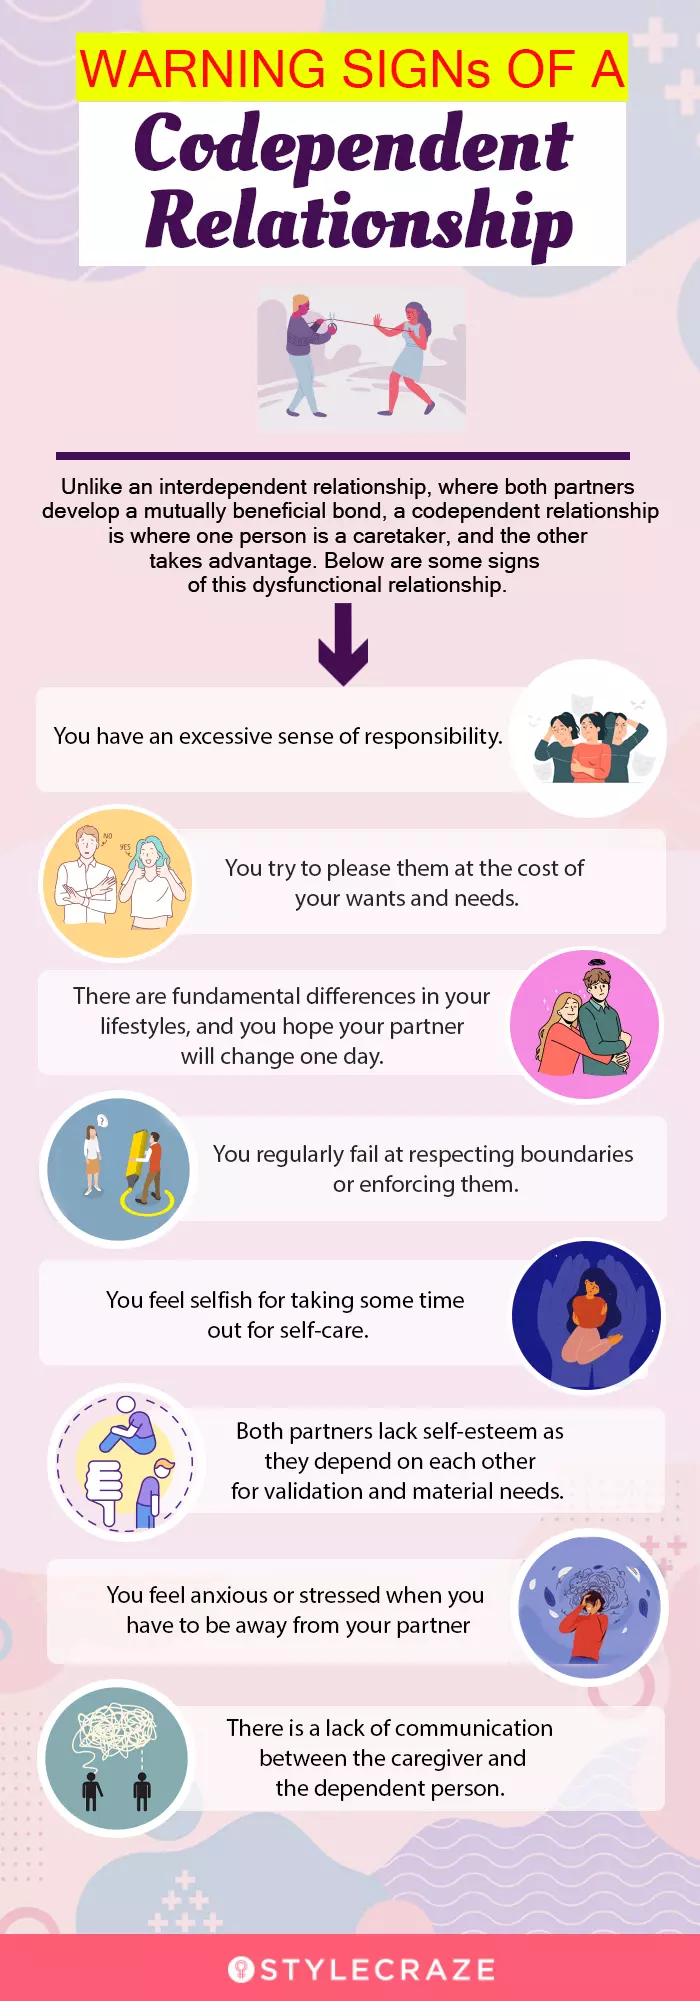 warning signs of a codependent relationship [infographic]